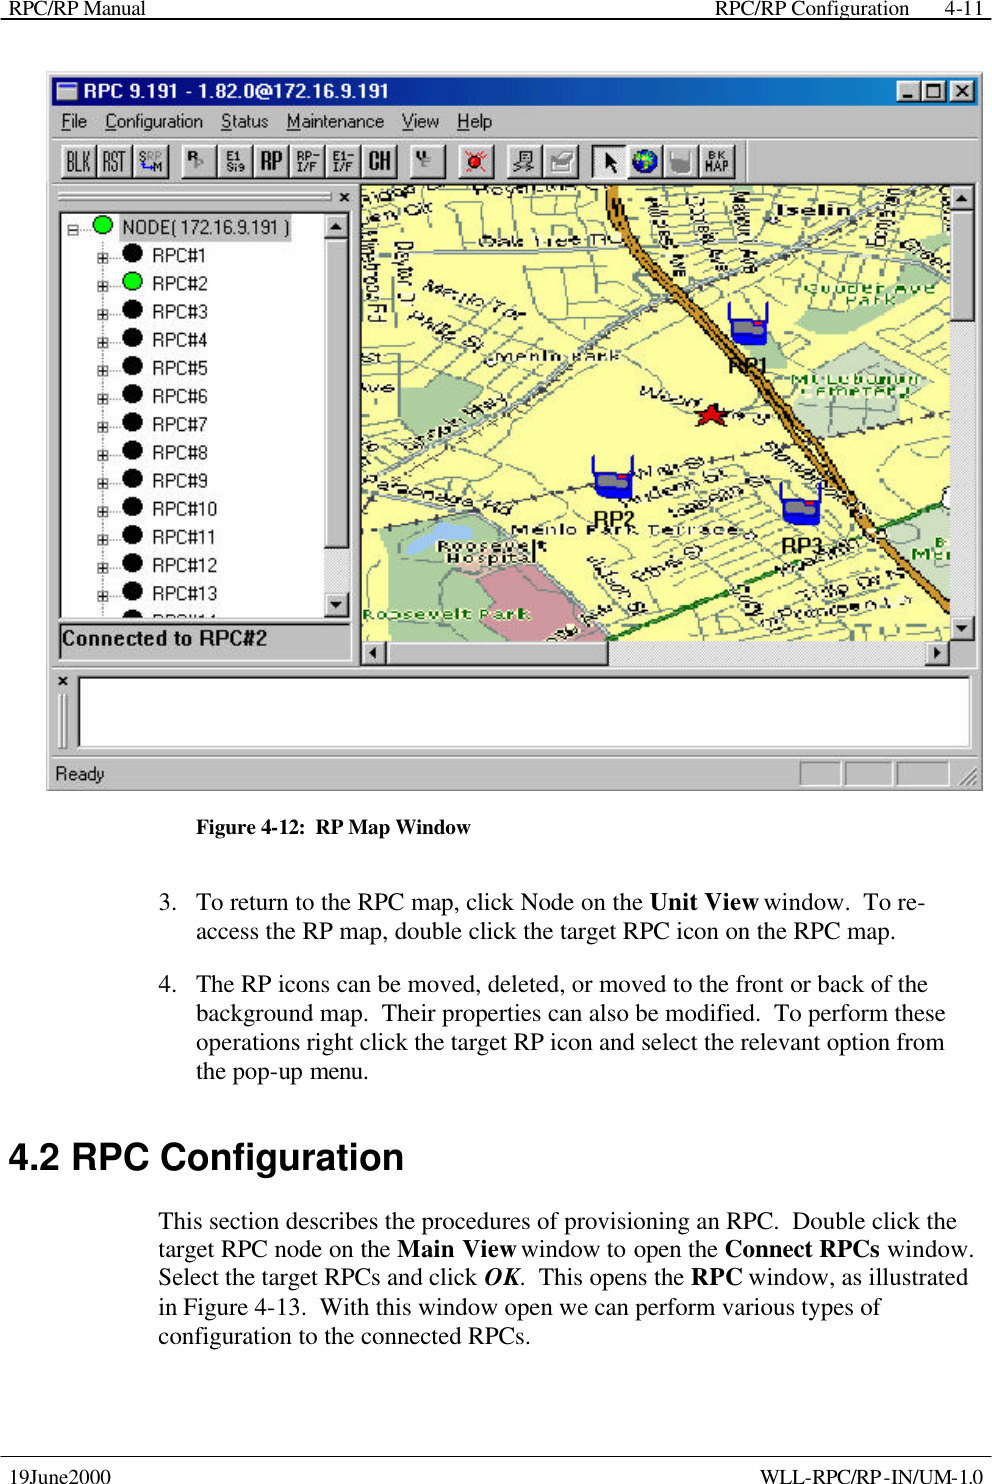 RPC/RP Manual    RPC/RP Configuration 19June2000    WLL-RPC/RP-IN/UM-1.0 4-11 Figure 4-12:  RP Map Window 3.  To return to the RPC map, click Node on the Unit View window.  To re-access the RP map, double click the target RPC icon on the RPC map. 4.  The RP icons can be moved, deleted, or moved to the front or back of the background map.  Their properties can also be modified.  To perform these operations right click the target RP icon and select the relevant option from the pop-up menu. 4.2 RPC Configuration This section describes the procedures of provisioning an RPC.  Double click the target RPC node on the Main View window to open the Connect RPCs window.  Select the target RPCs and click OK.  This opens the RPC window, as illustrated in Figure 4-13.  With this window open we can perform various types of configuration to the connected RPCs. 